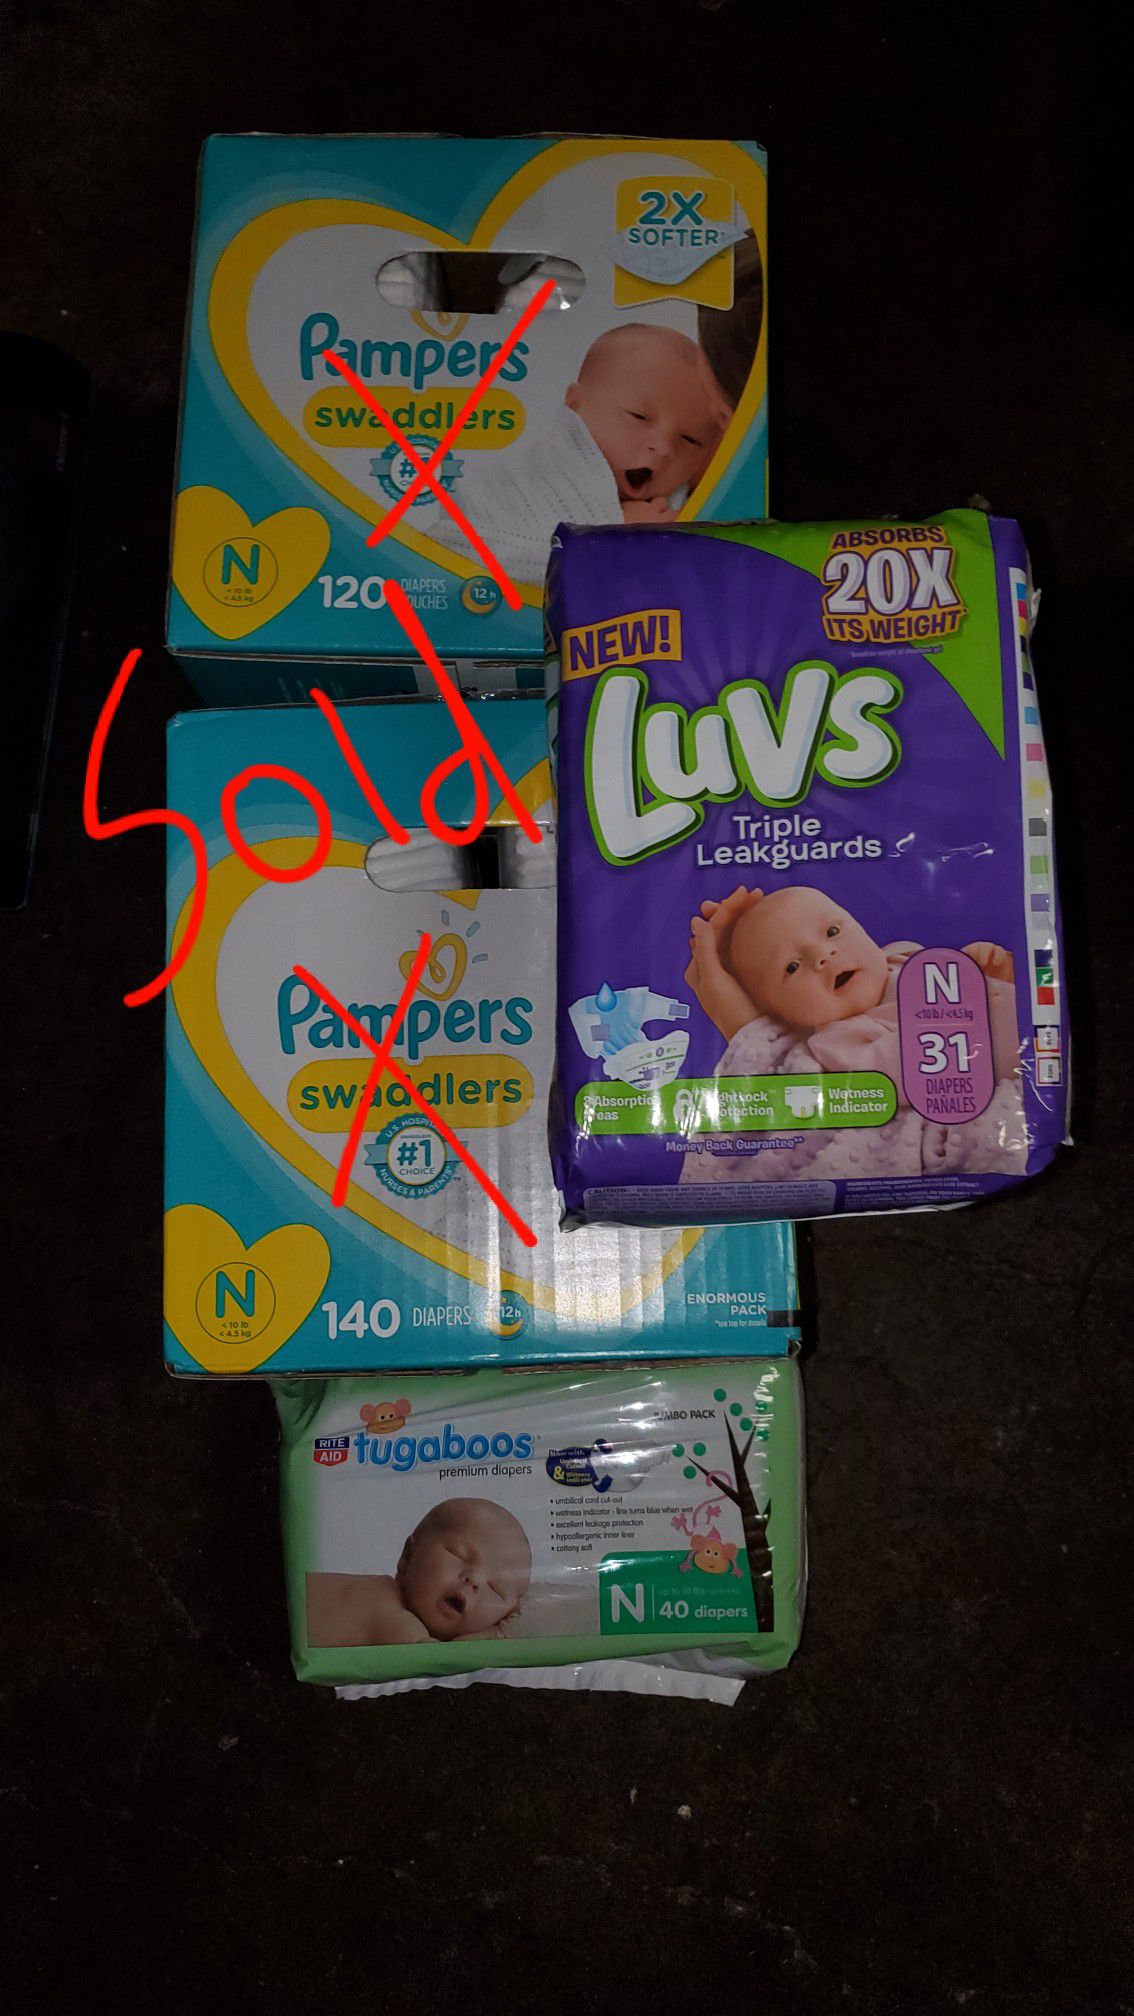 TONS OF UNOPENED DIAPERS FROM BABY SHOWER! BABY NO LONGER FITS! CHECK DETAILS FOR PRICING